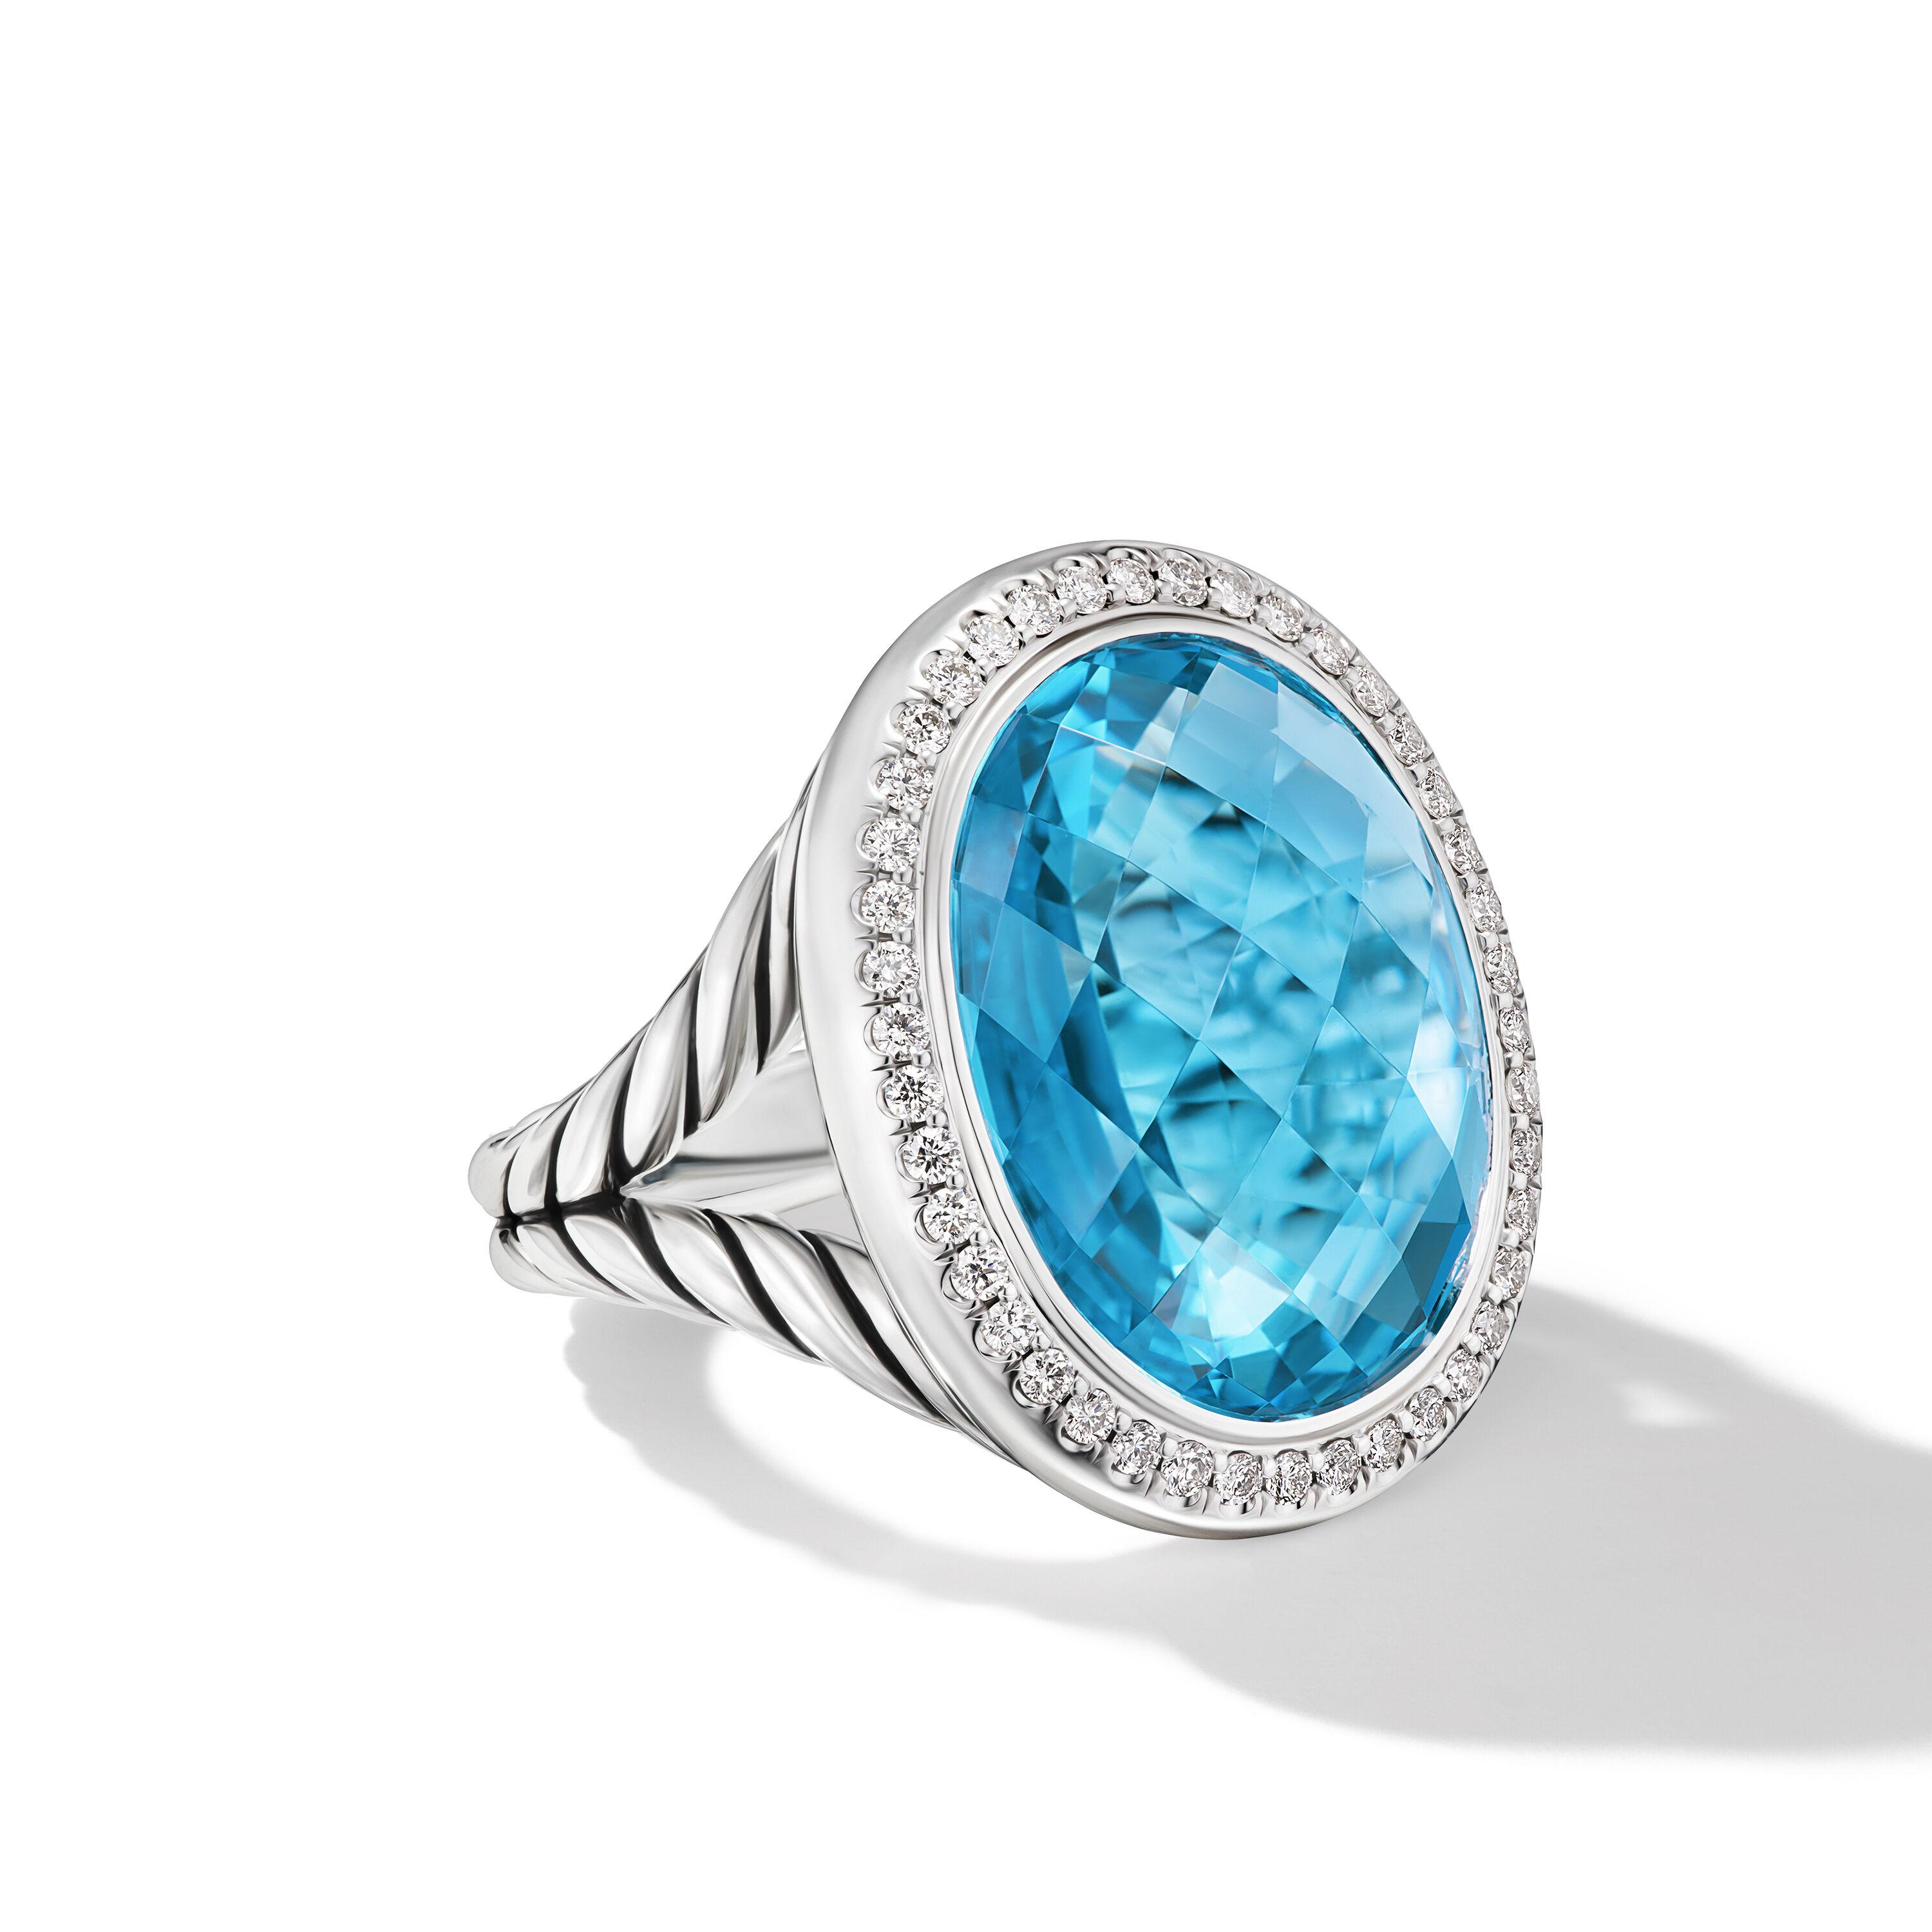 David Yurman Albion Oval Ring in Sterling Silver with Blue Topaz and Diamonds 0